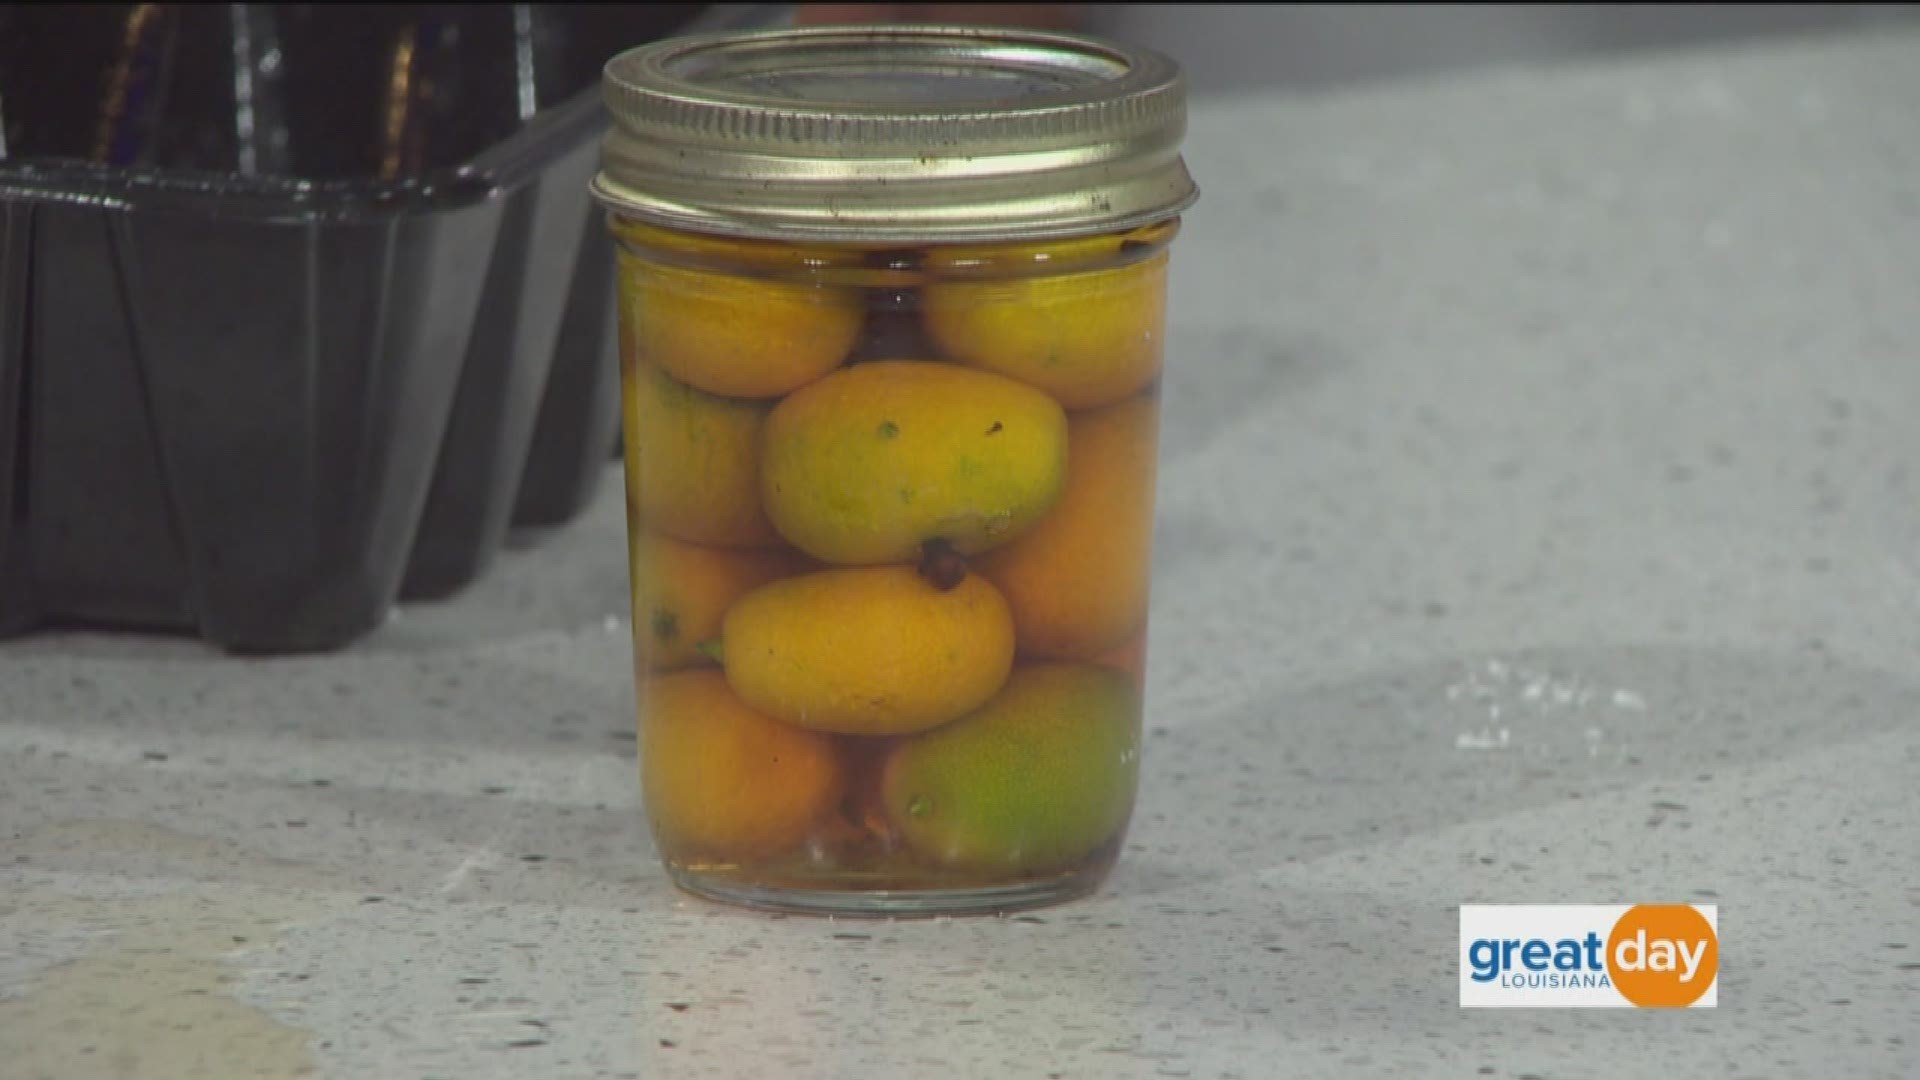 Liz Williams with the Southern Food & Beverage Museum stopped by to show us how to make brandied kumquats.